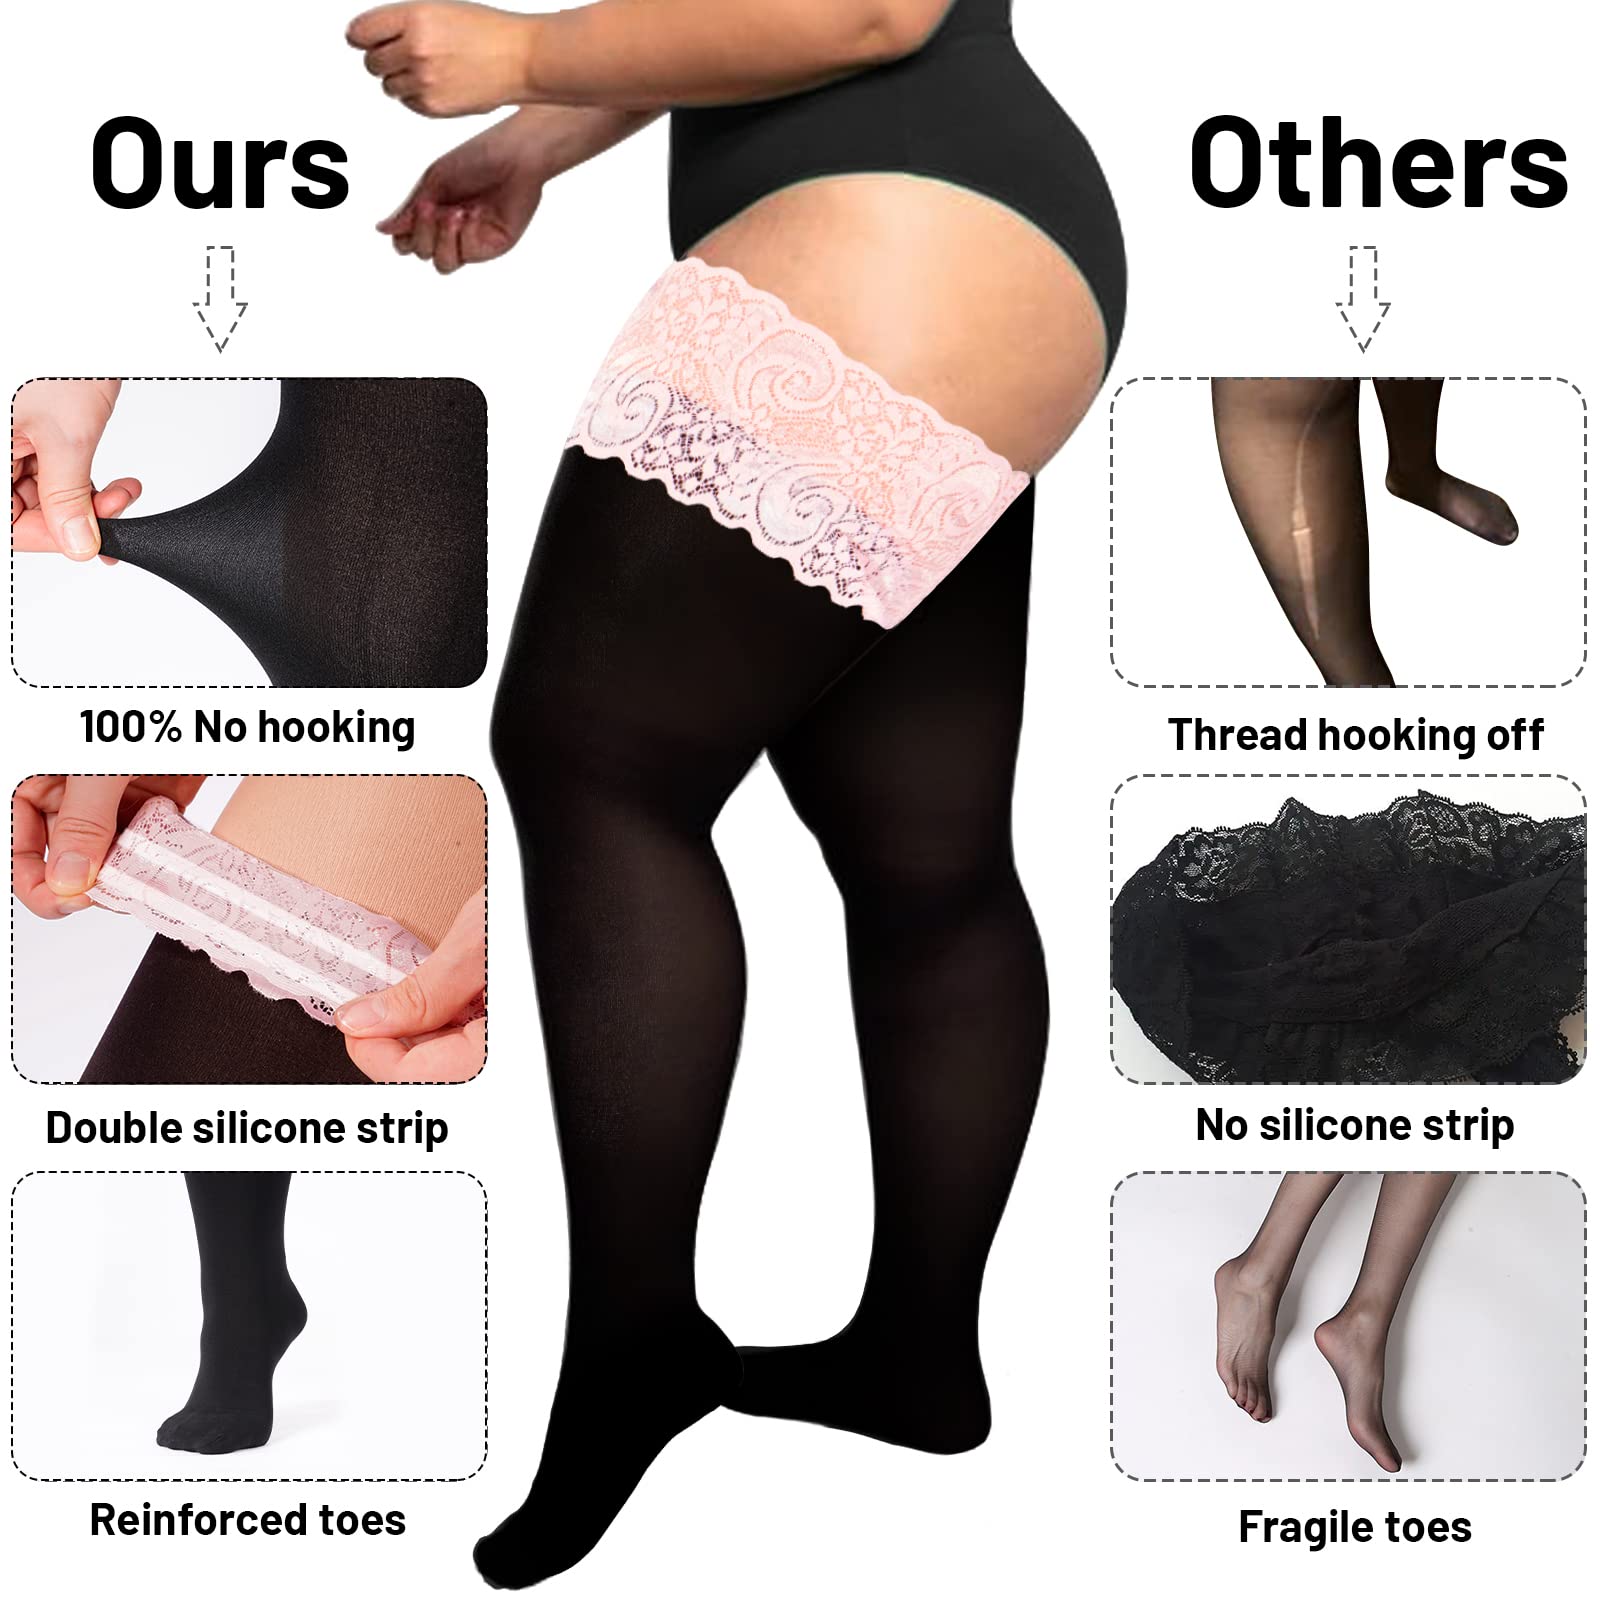 55D Semi Sheer Silicone Lace Stay Up Thigh Highs Pantyhose-Black & Light Lace - Moon Wood